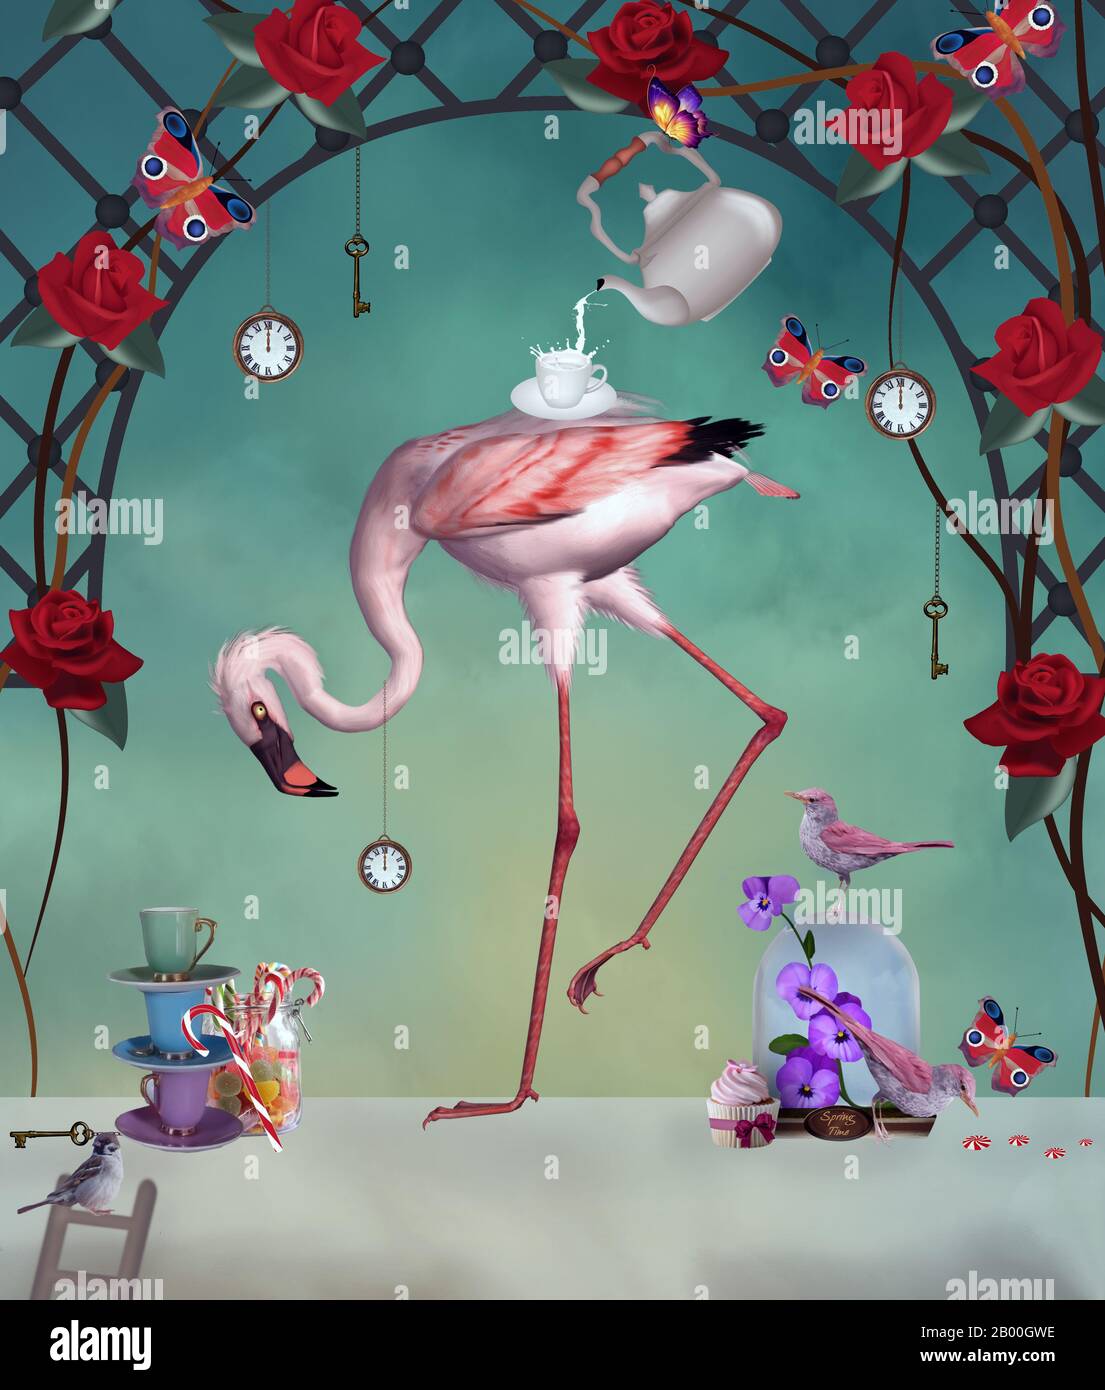 Wonderland party with a pink flamingo Stock Photo